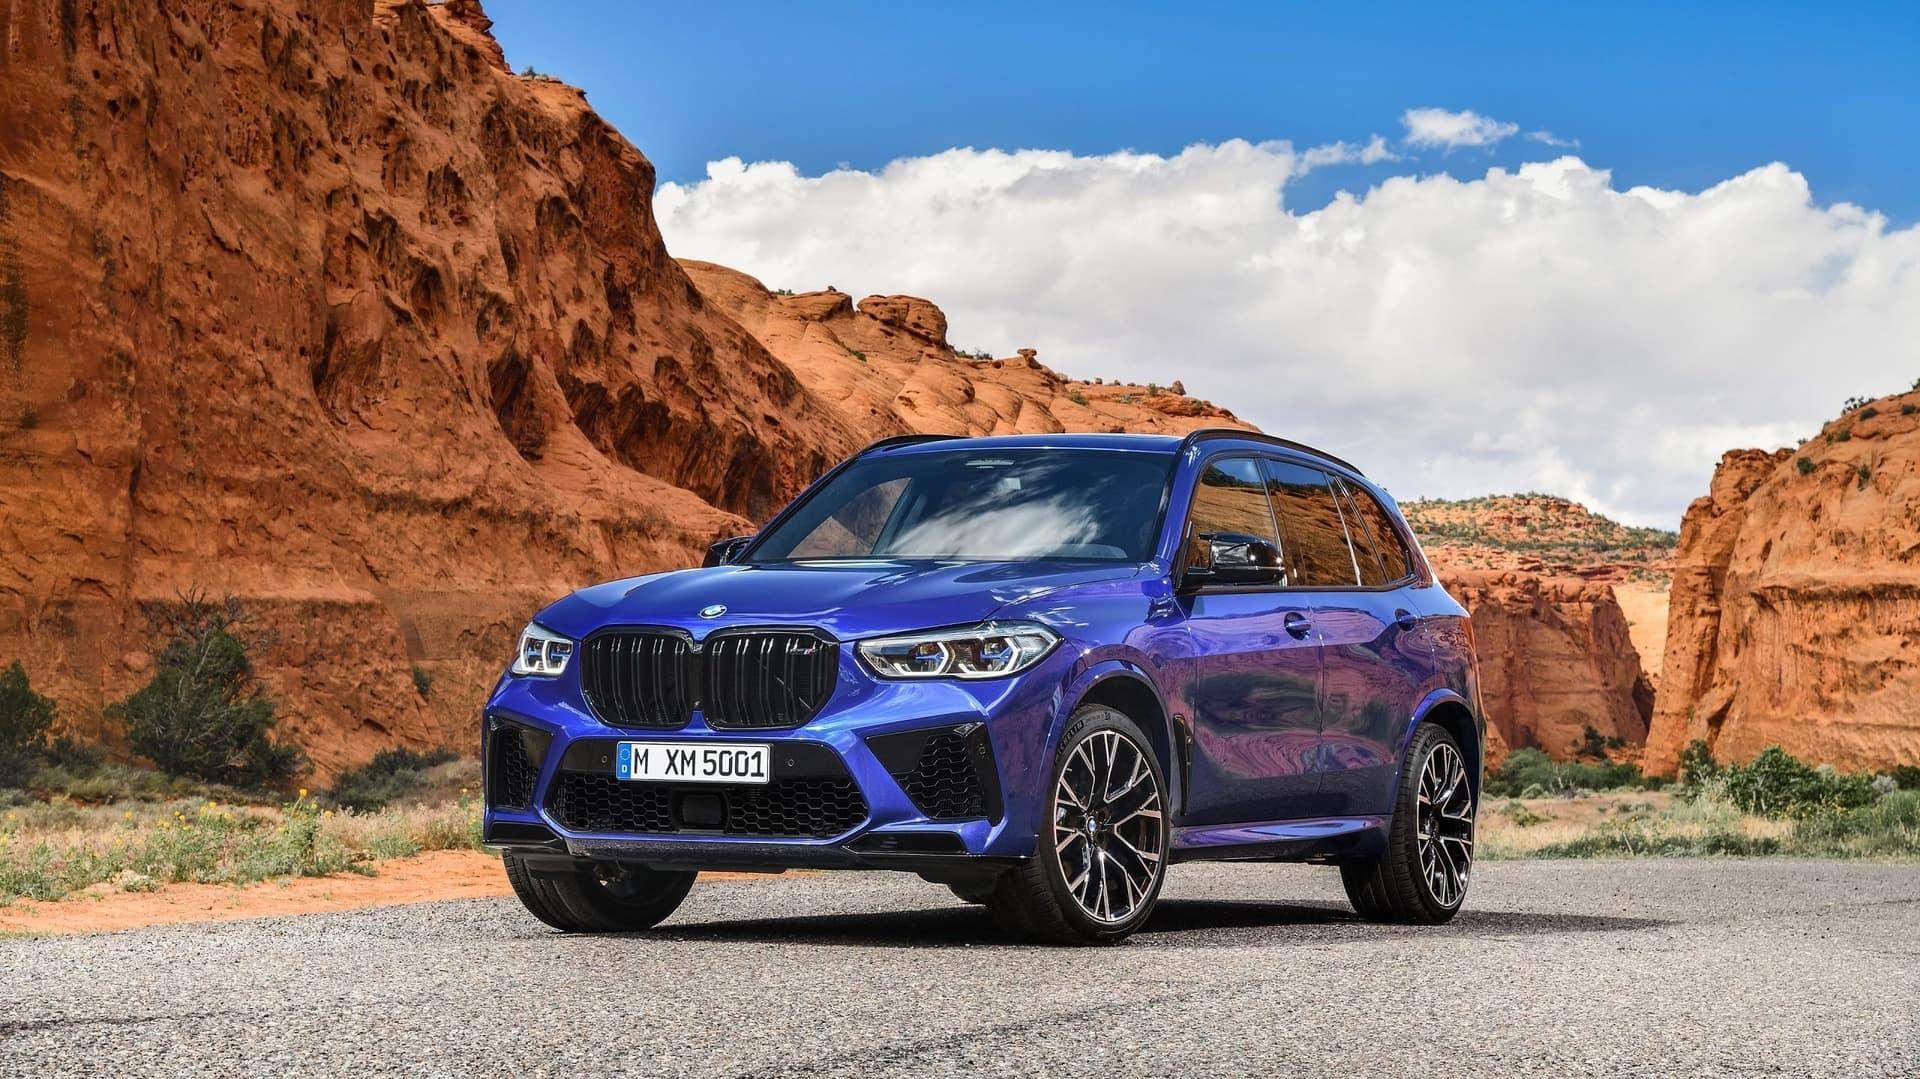  Reasons You Should Consider Buying a BMW X5 BMW of Owings